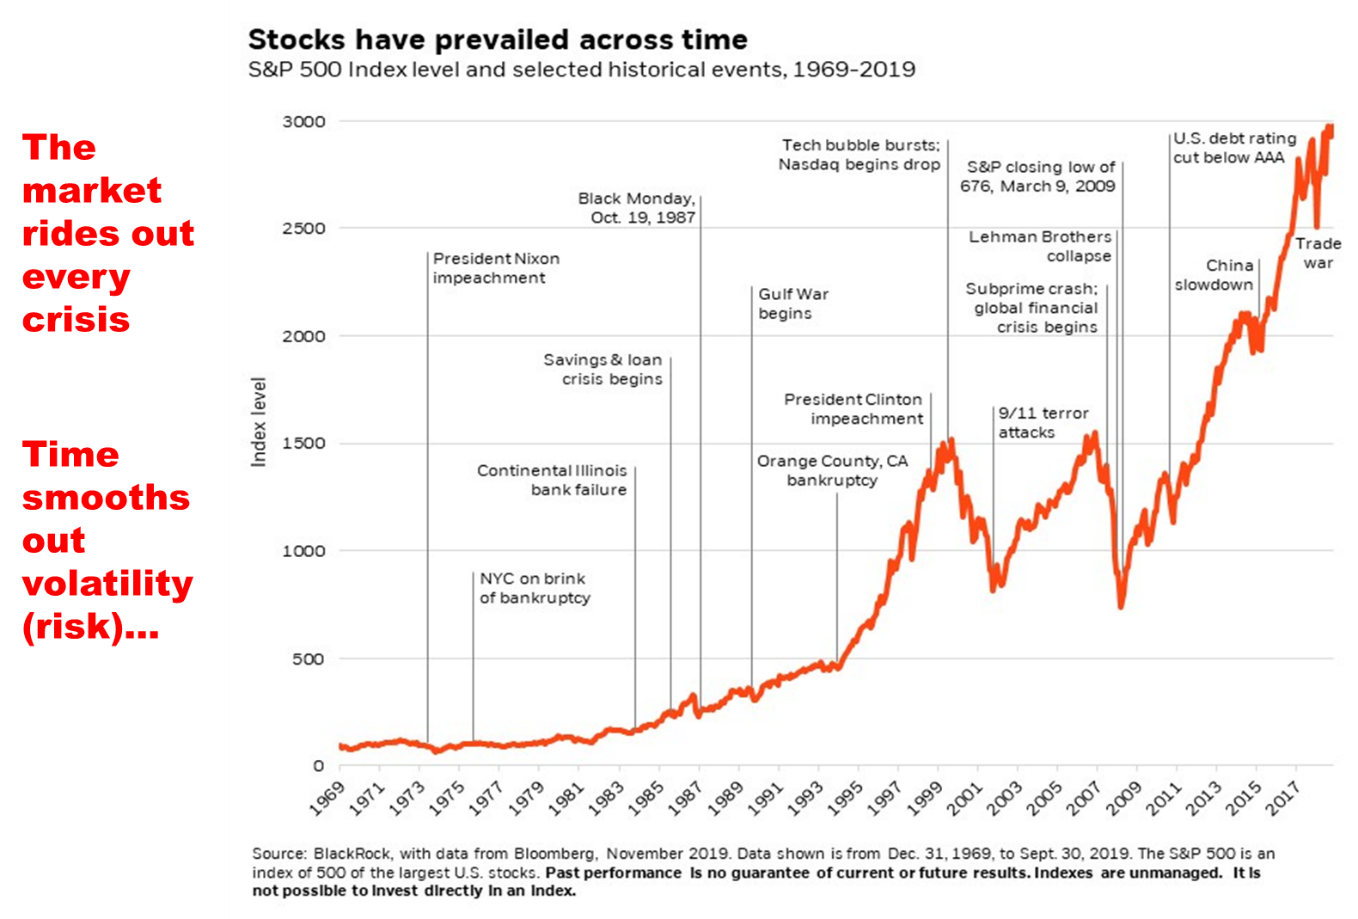 Stocks have prevailed across time